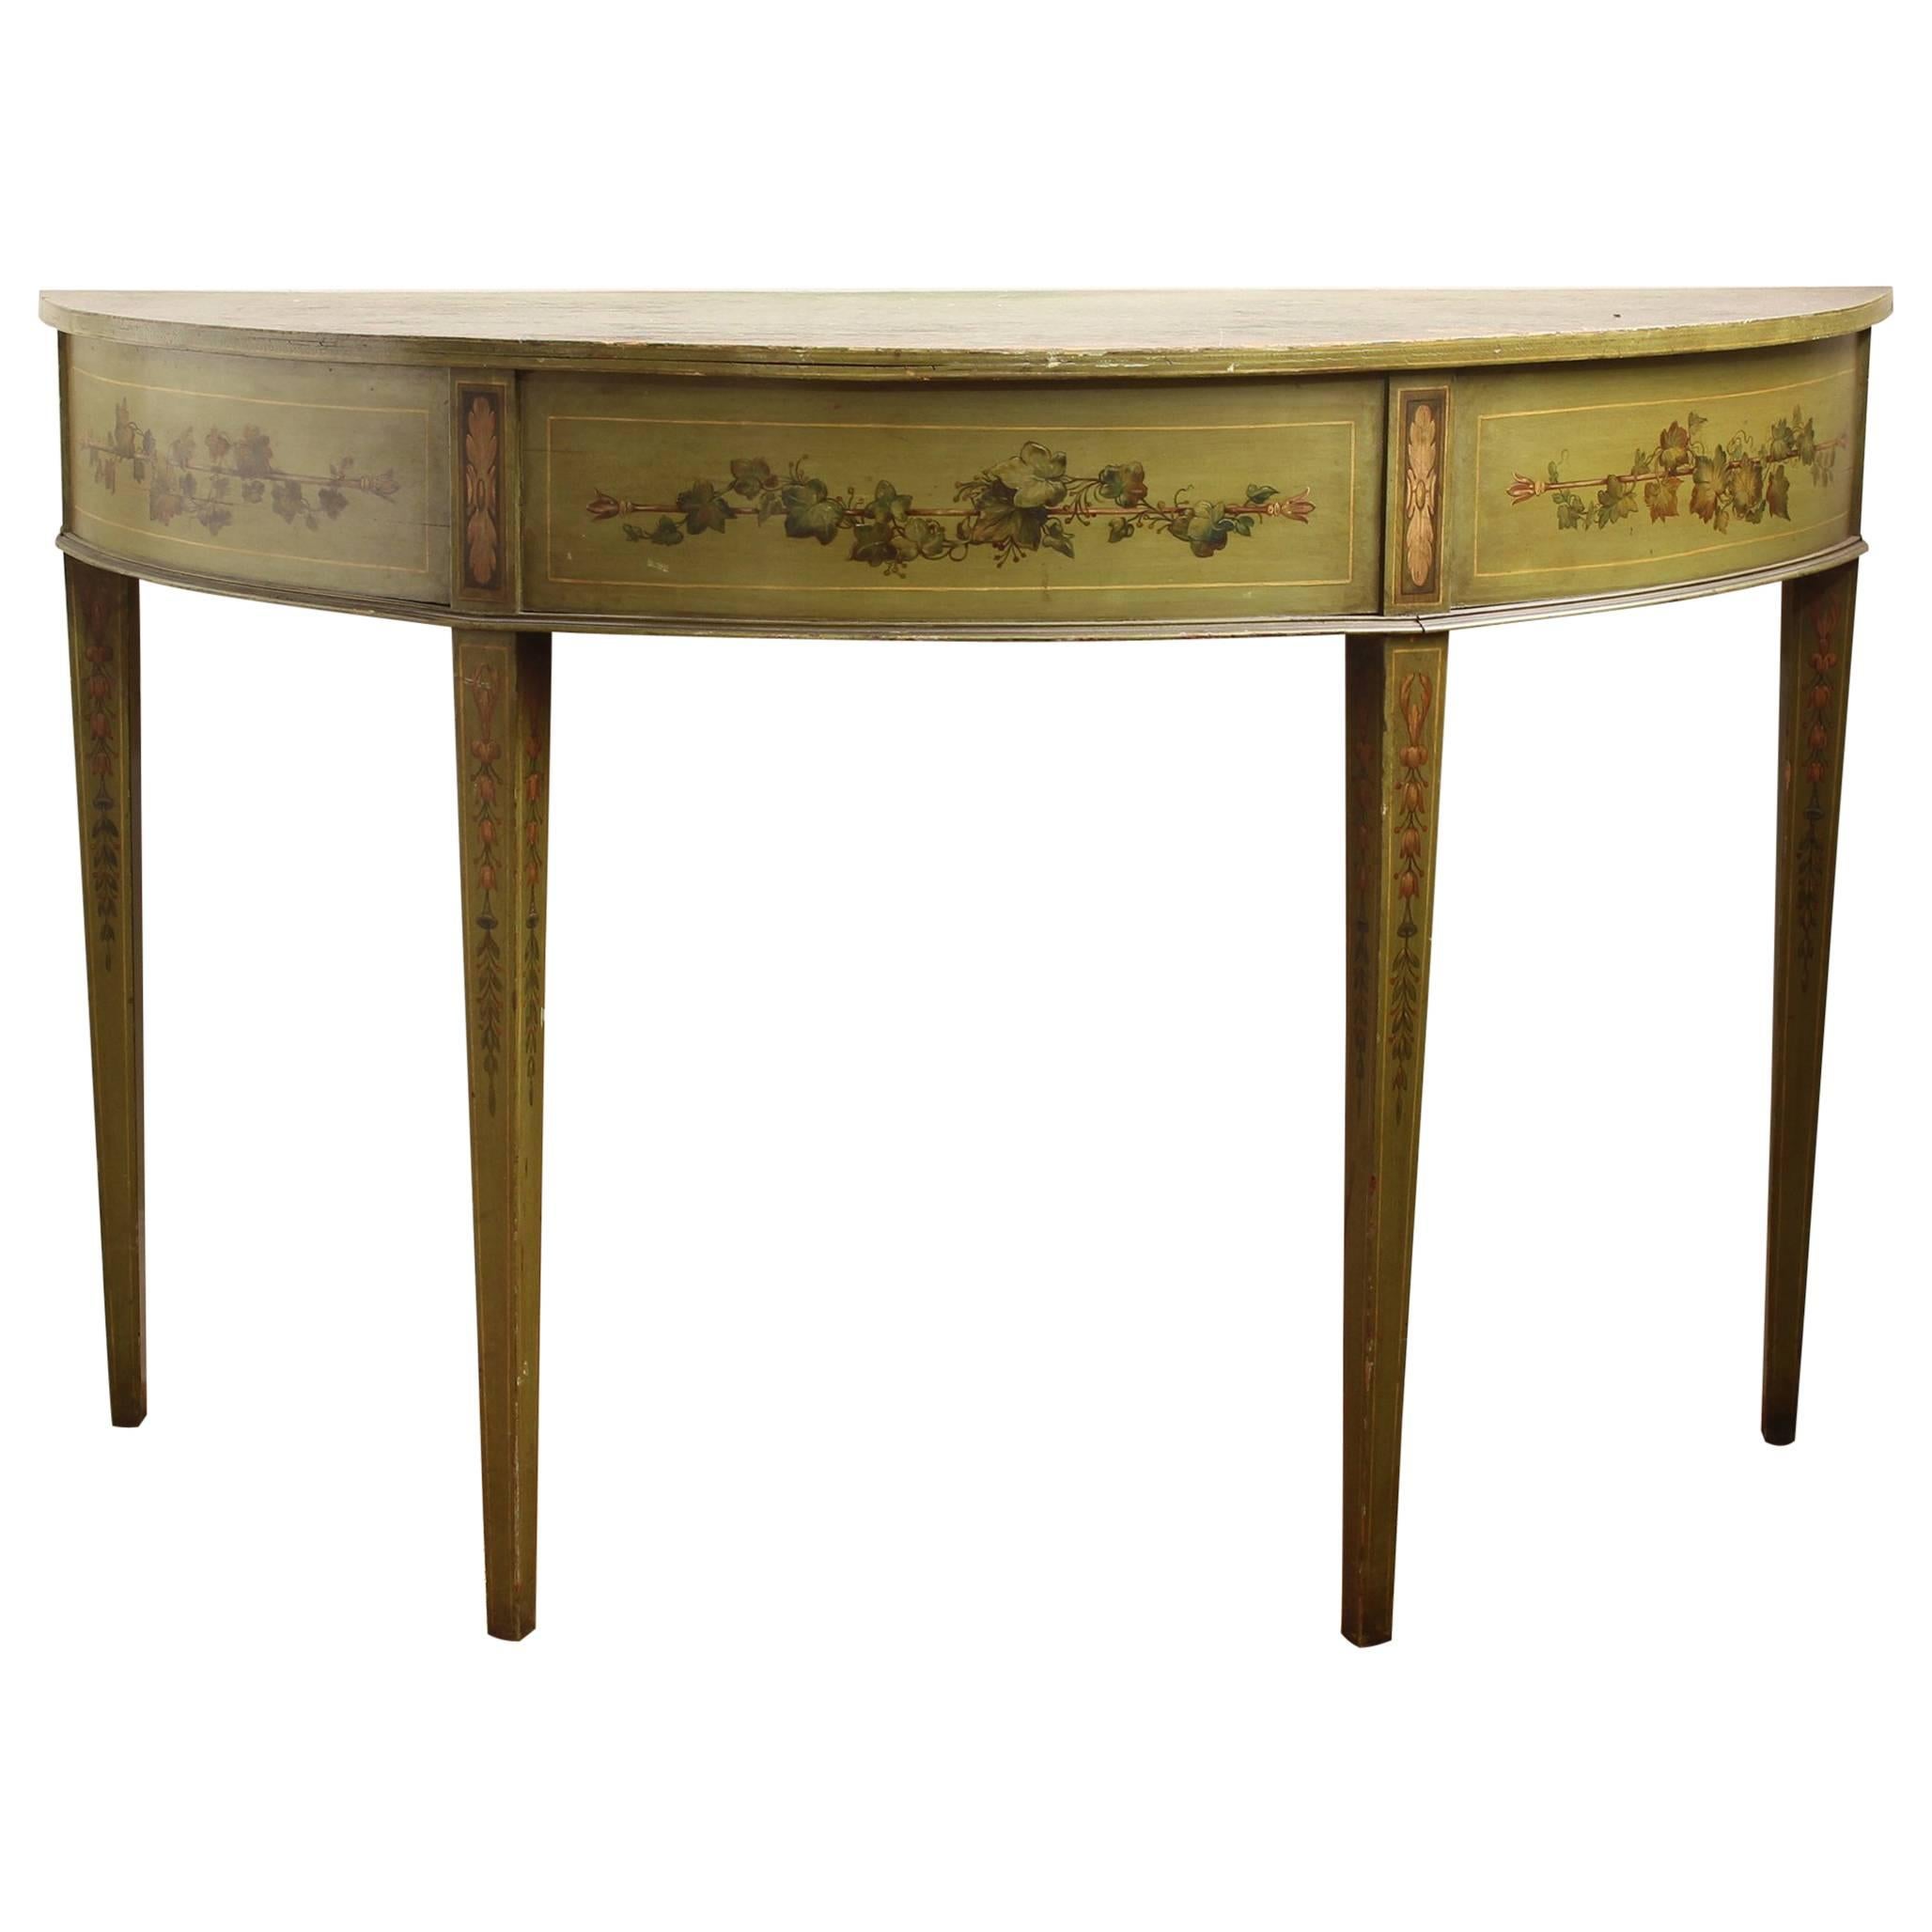 19th Century English Adam Style Paint Decorated Demilune Console Table